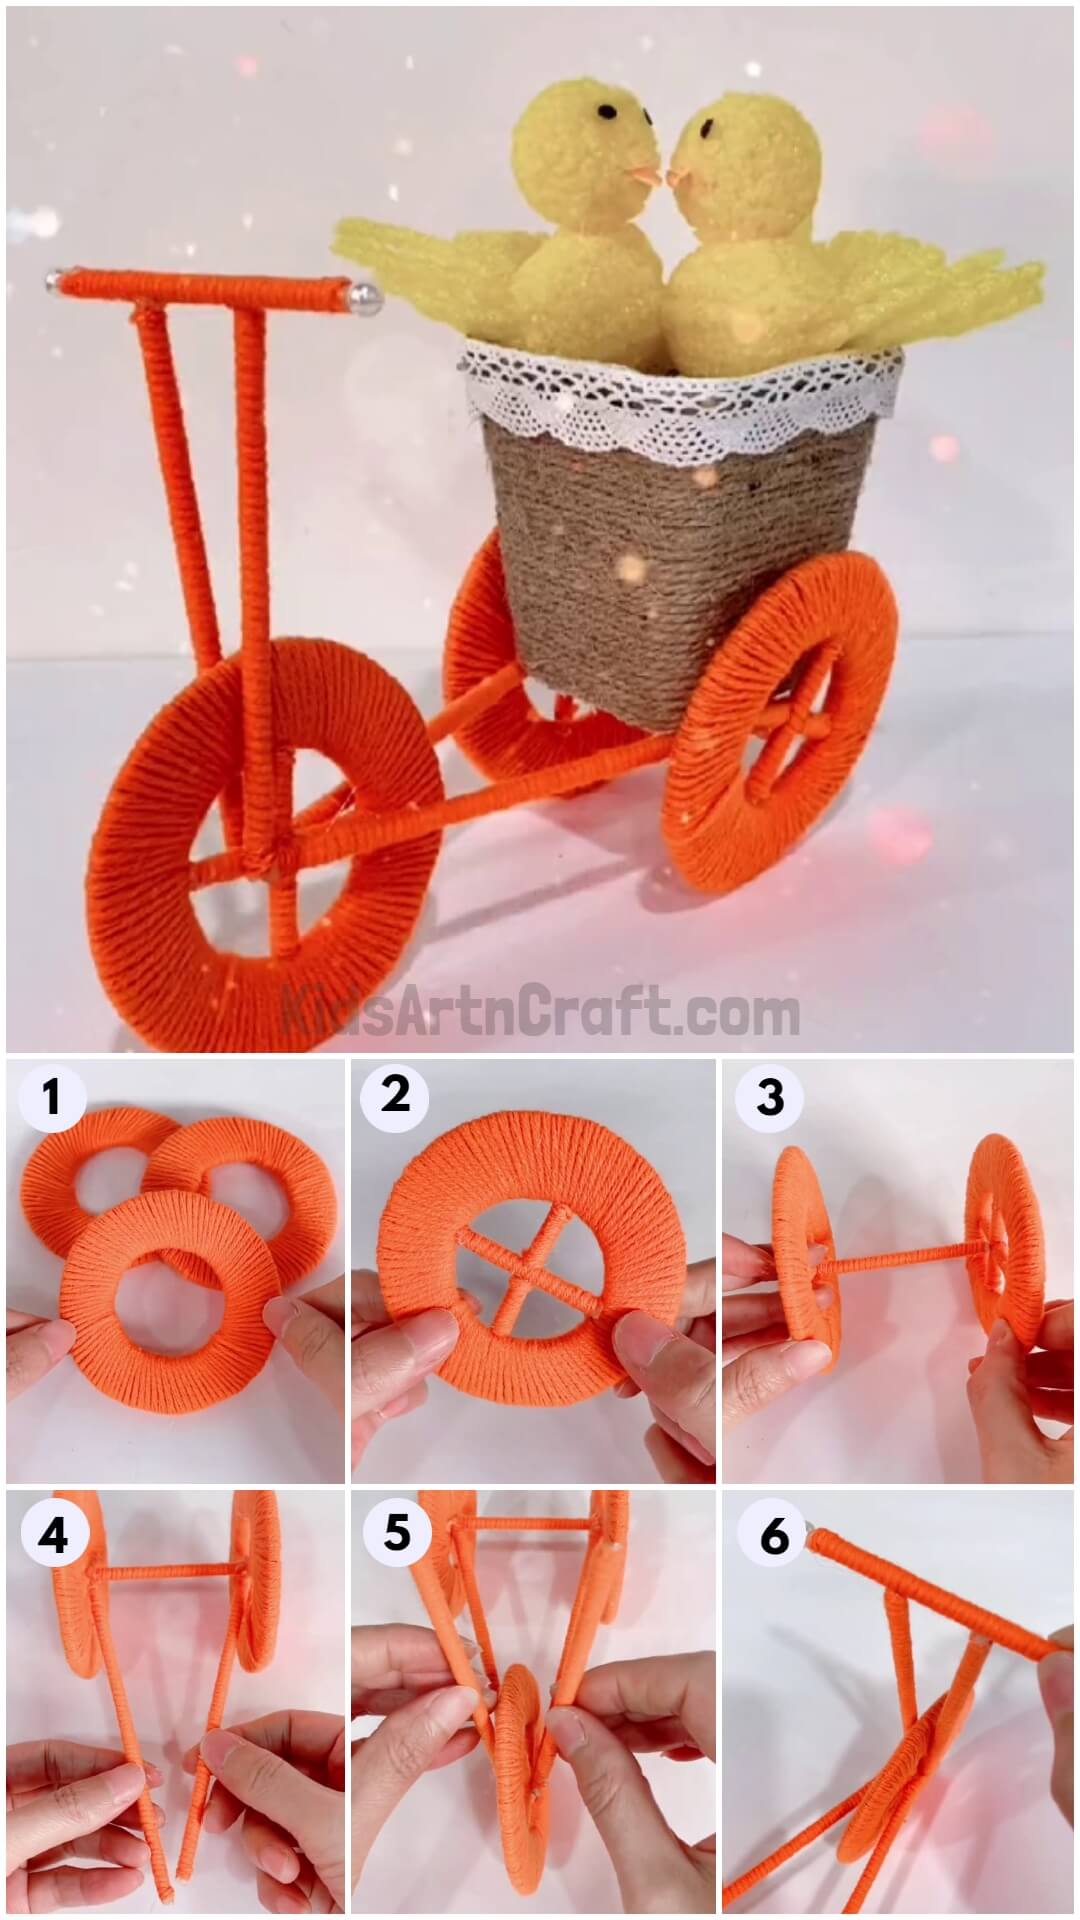 DIY Cardboard And Stick Cycle Centerpiece Home Decoration Craft For Kids